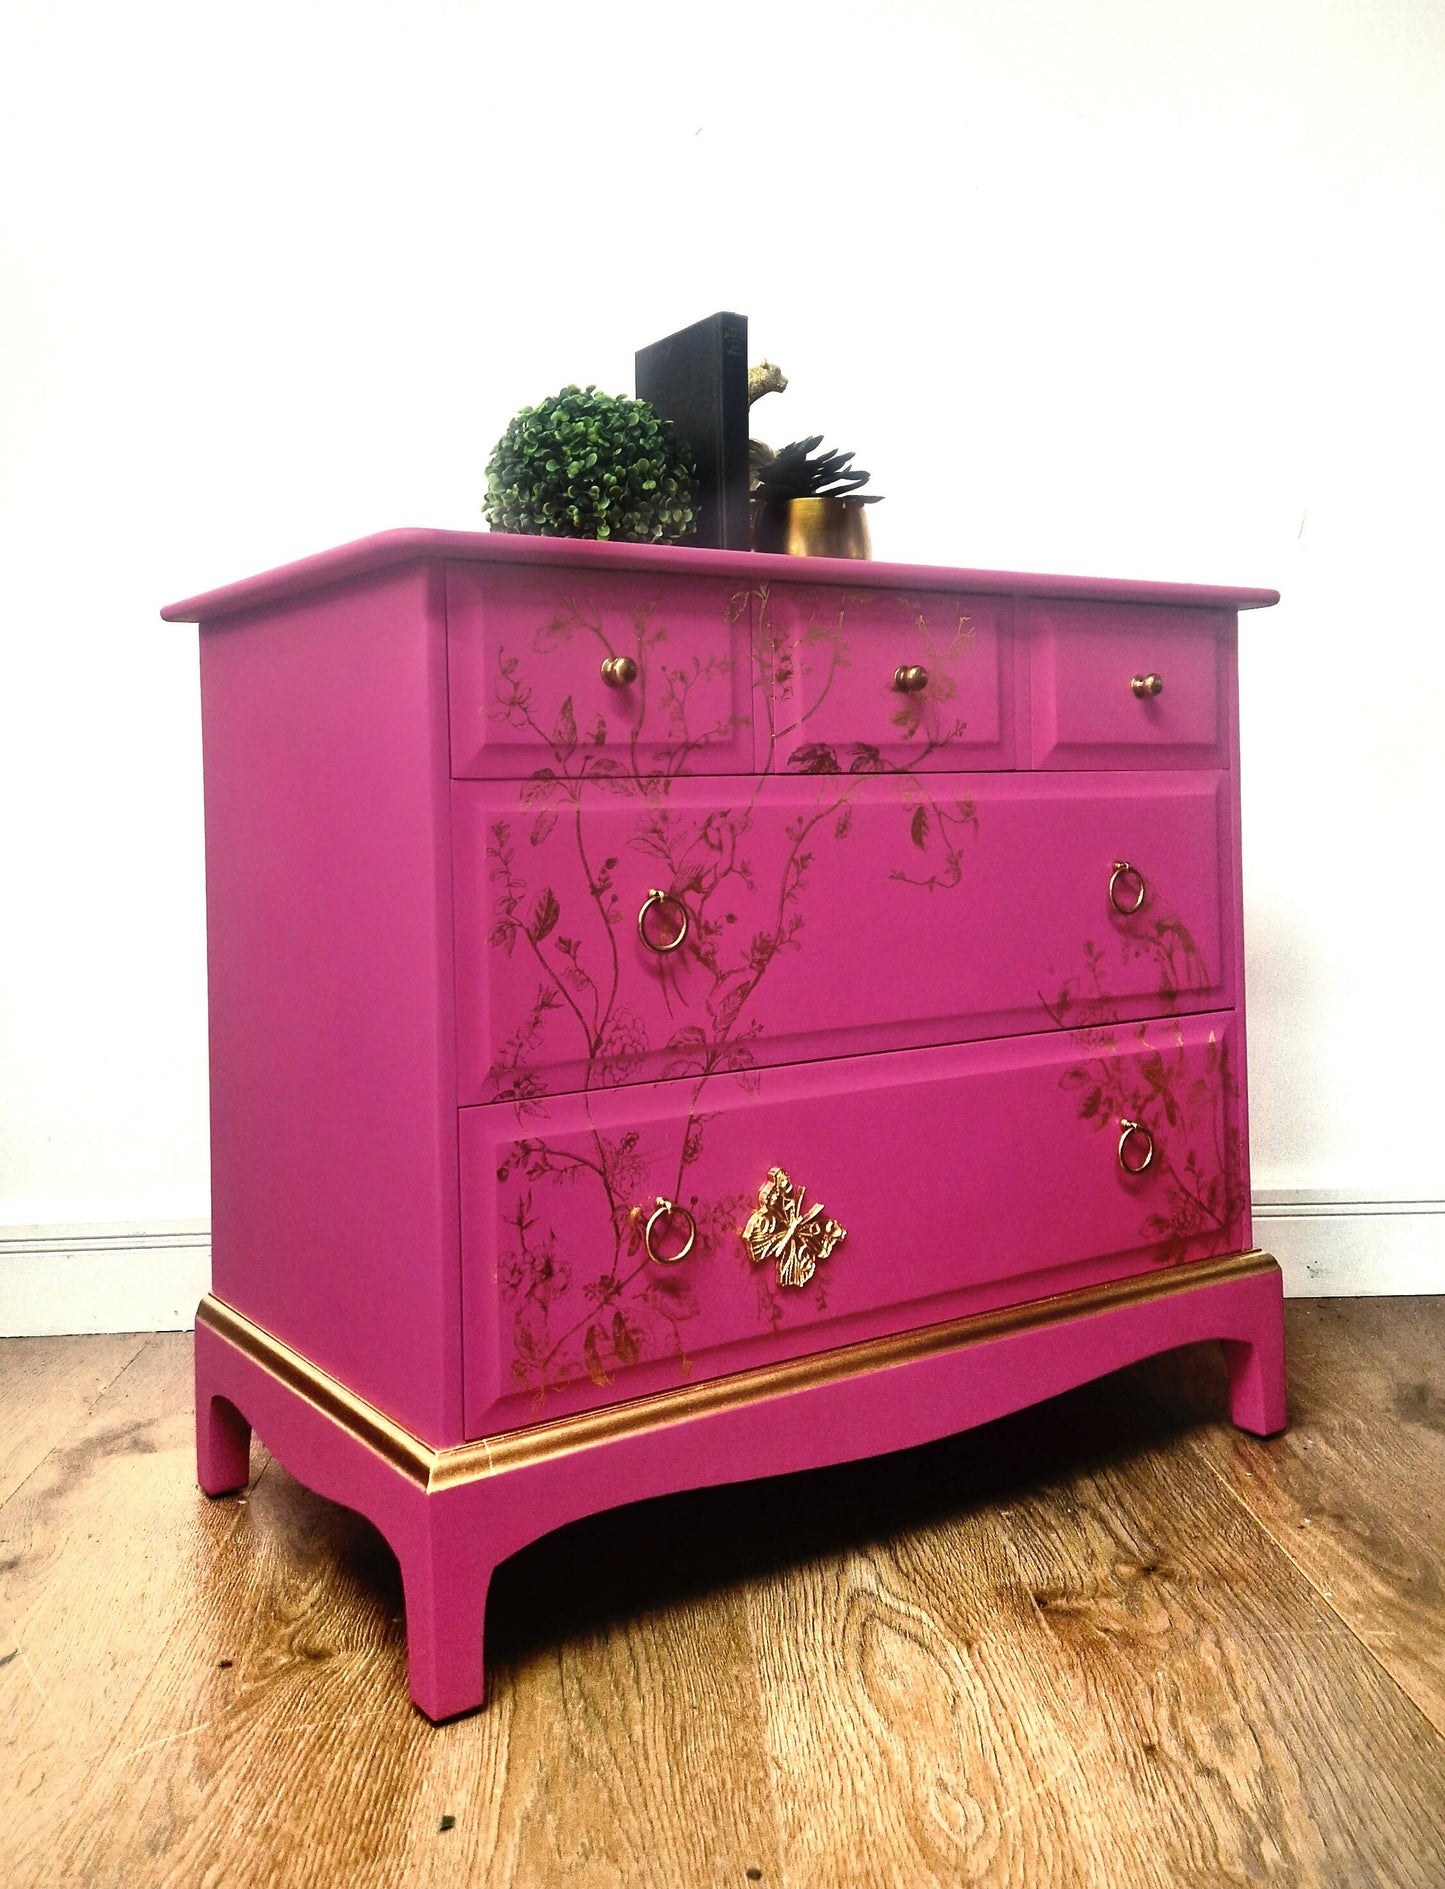 Vintage Stag chest of drawers in pink